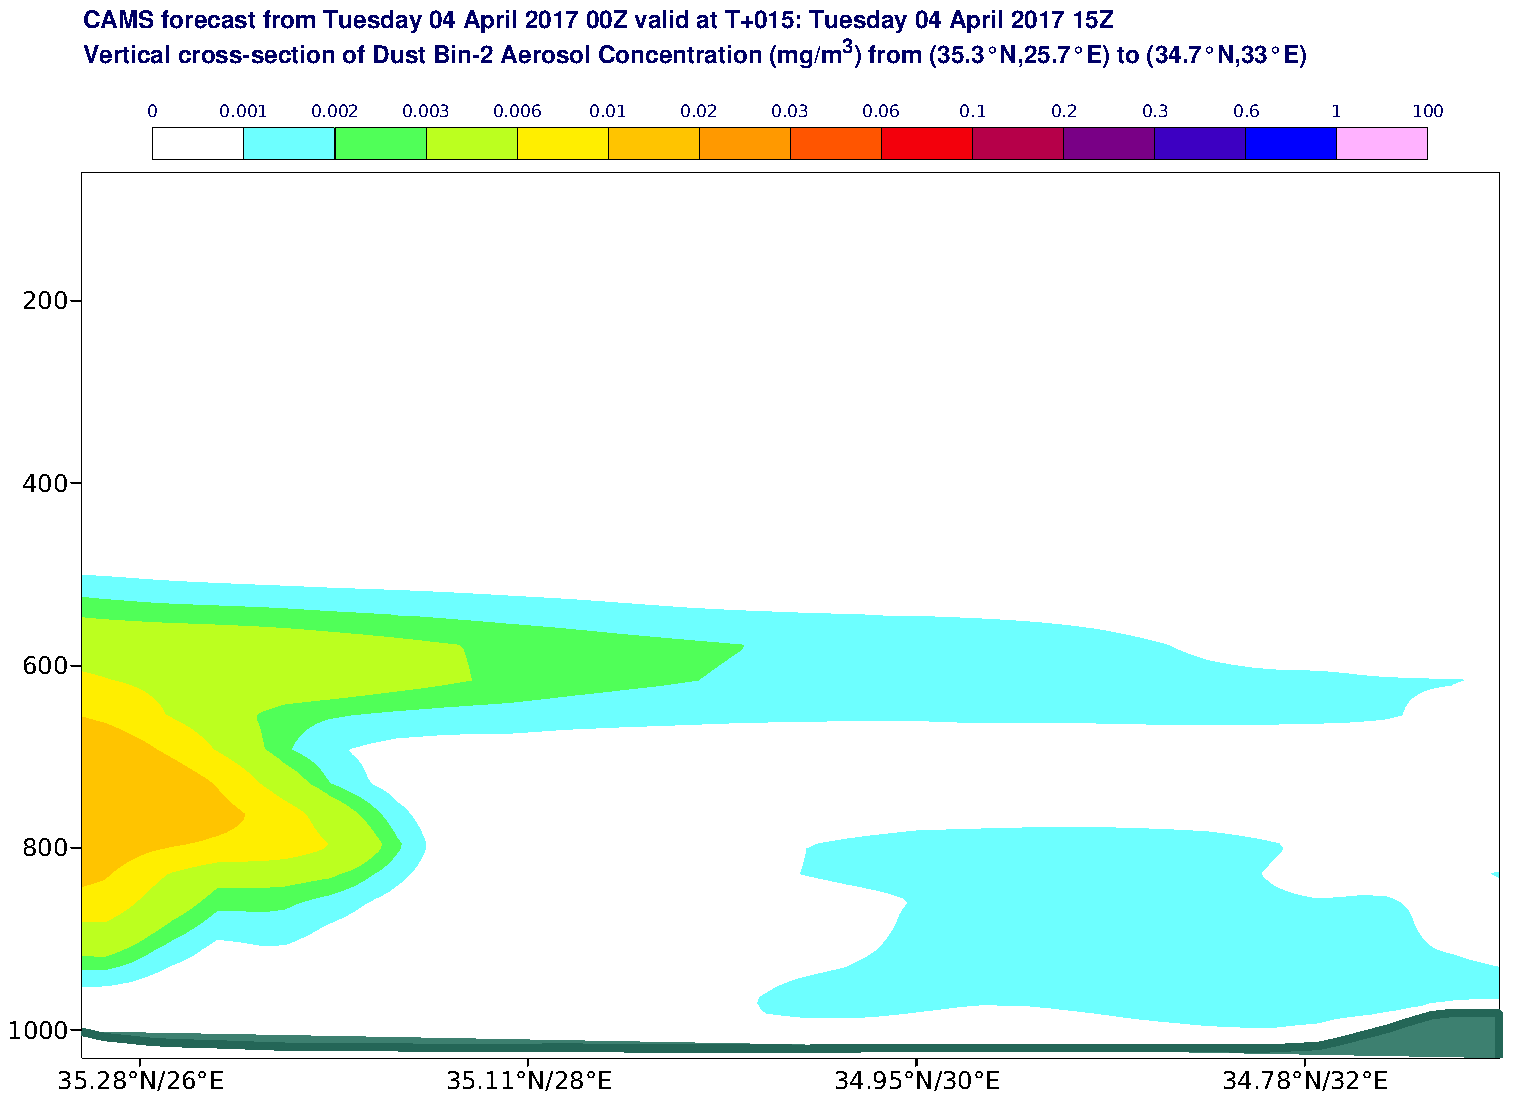 Vertical cross-section of Dust Bin-2 Aerosol Concentration (mg/m3) valid at T15 - 2017-04-04 15:00